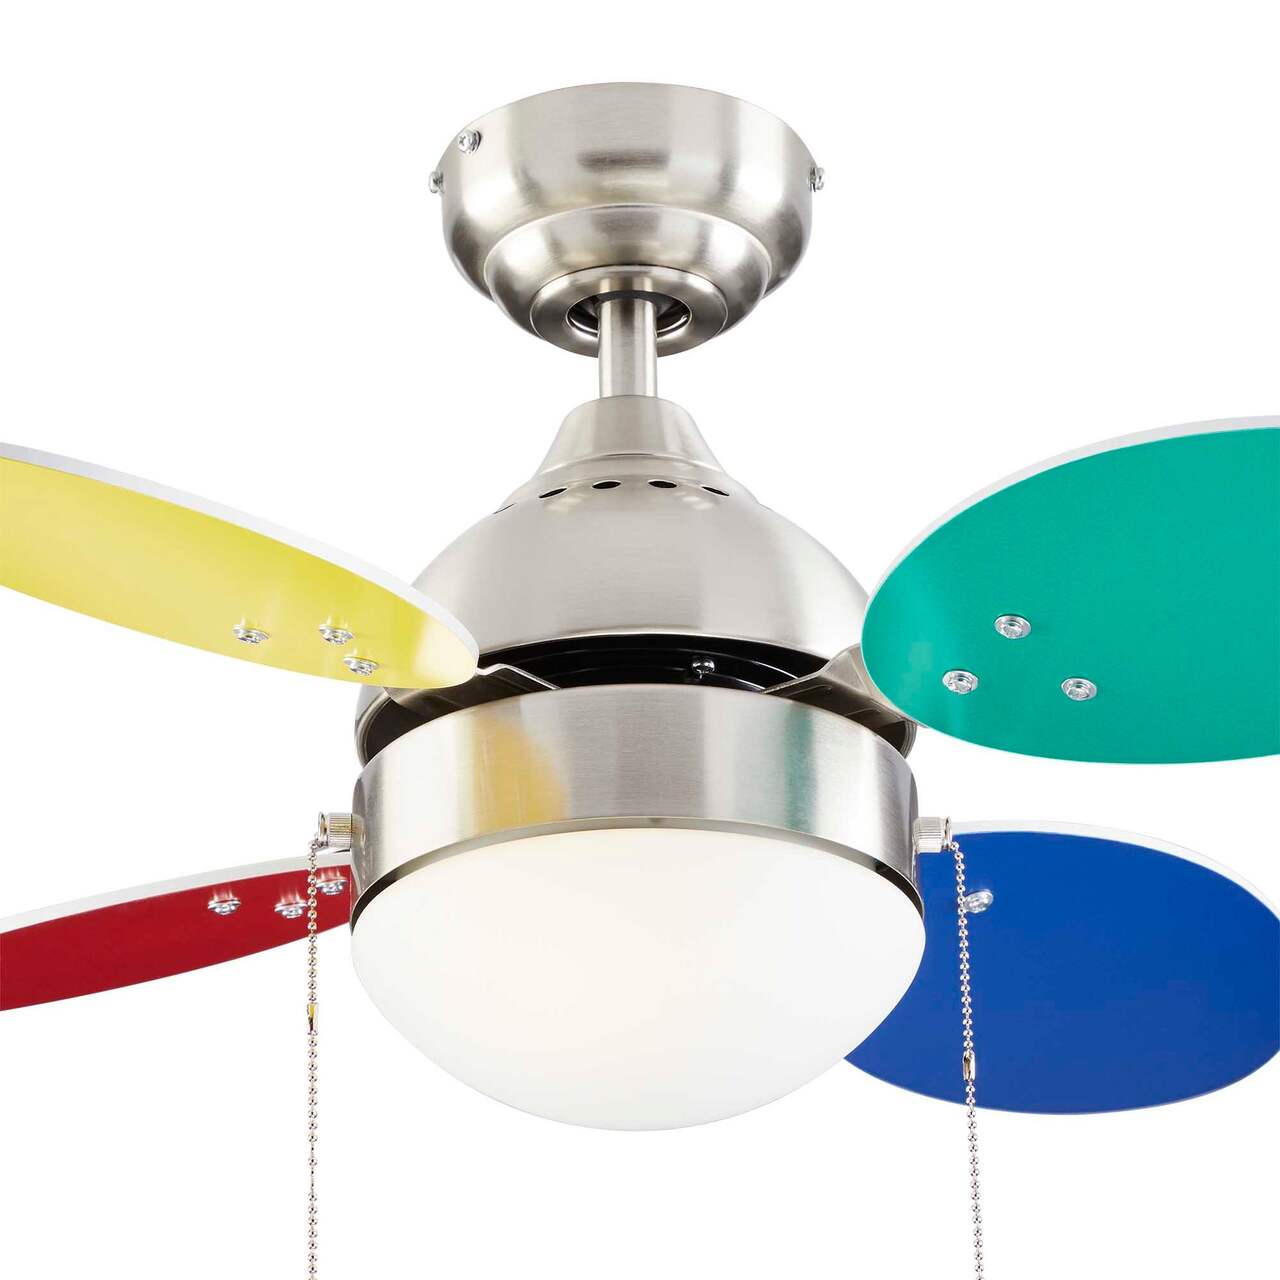 NOMA Ollie Reversible 4-Blade 3-Speed Ceiling Fan with Lighting